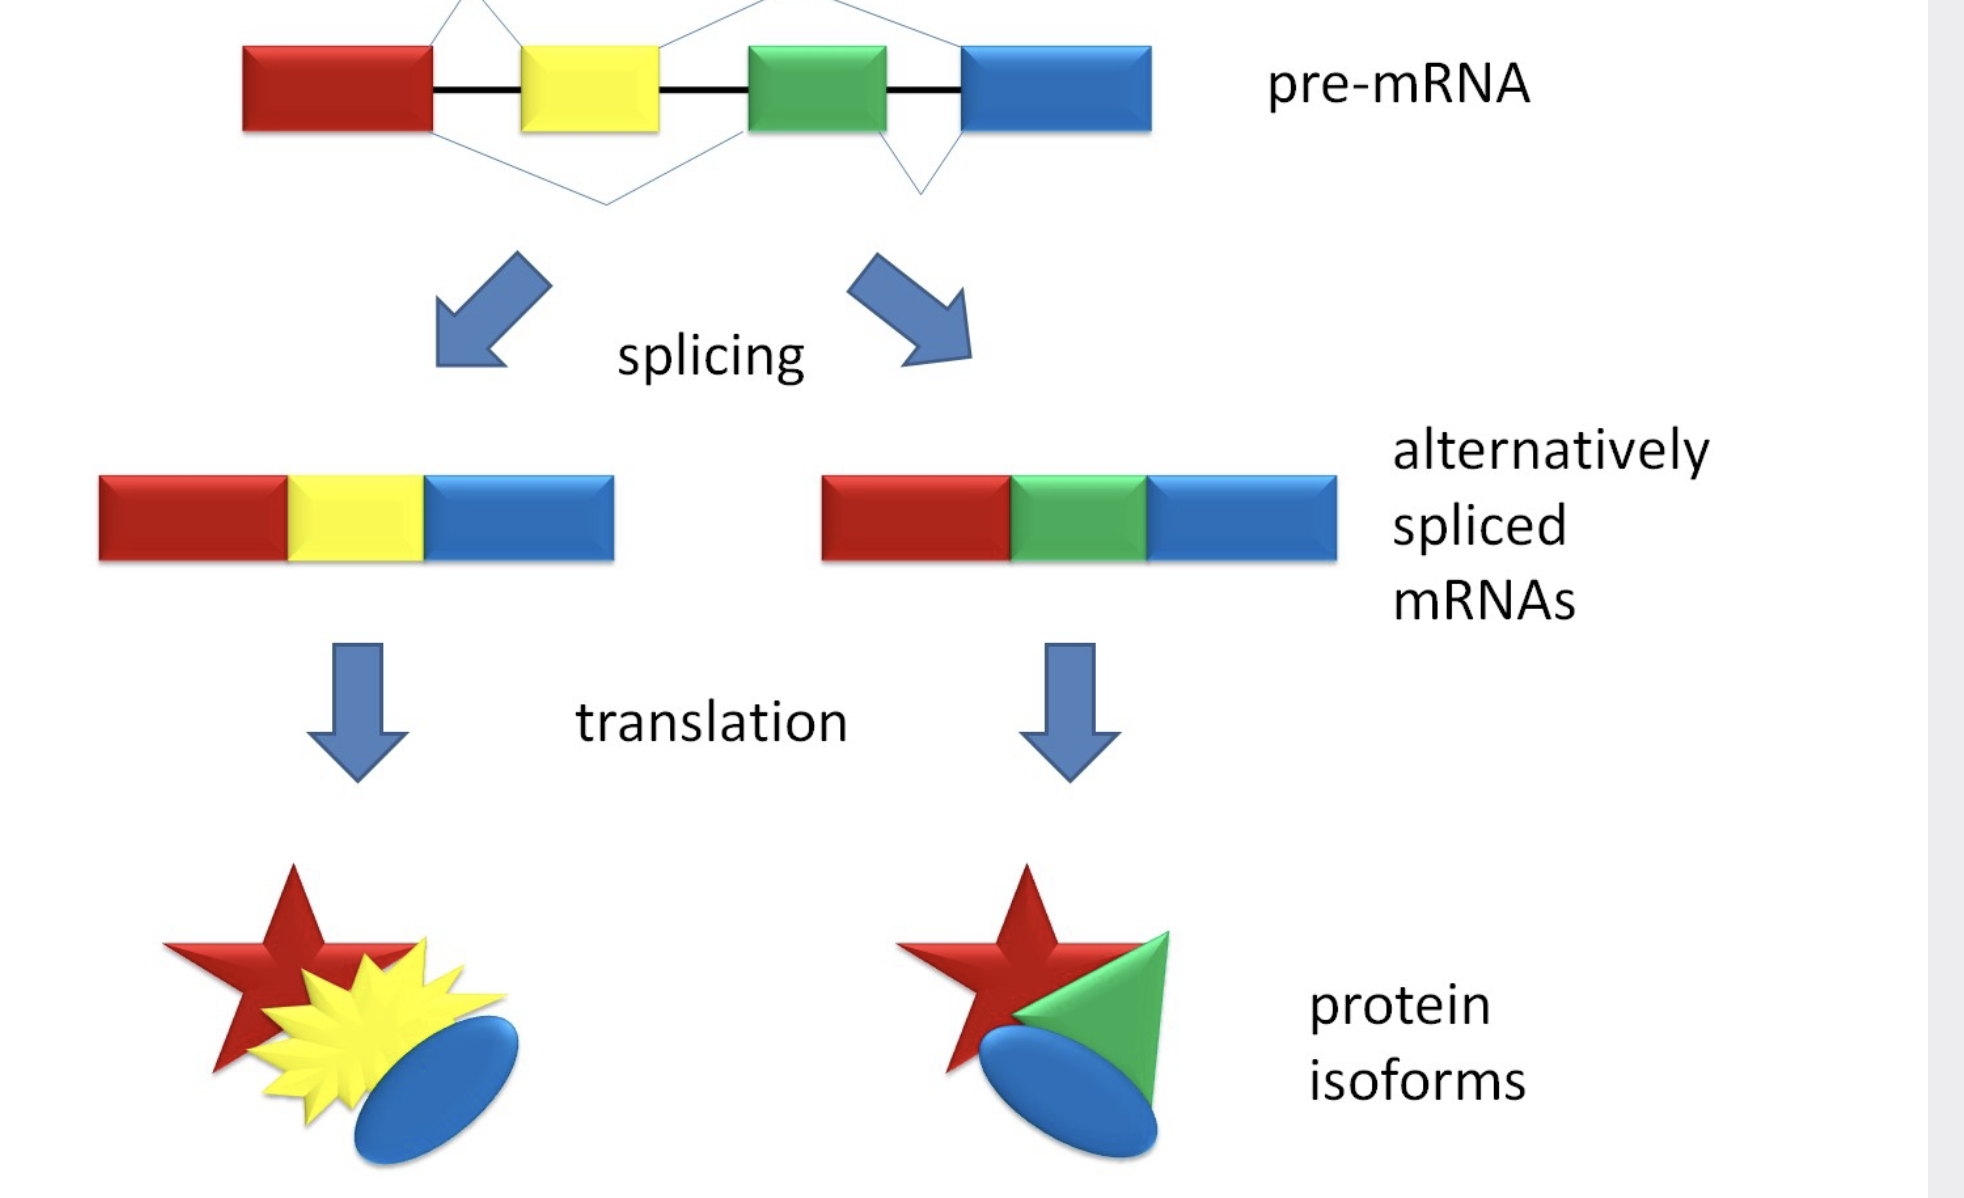 <p>Some introns contain sequences that regulate gene expression.</p><p>.Some genes can encode more than one kind of polypeptide, depending on which segments are \n treated as exons during splicing. This is called alternative splicing.</p><p>.Consequently, the number of different proteins a eukaryotic organism can produce is much greater than its number of genes.</p><p>.Splicing can produce multiple forms of a protein from a single gene by joining together different combinations of exons.</p>